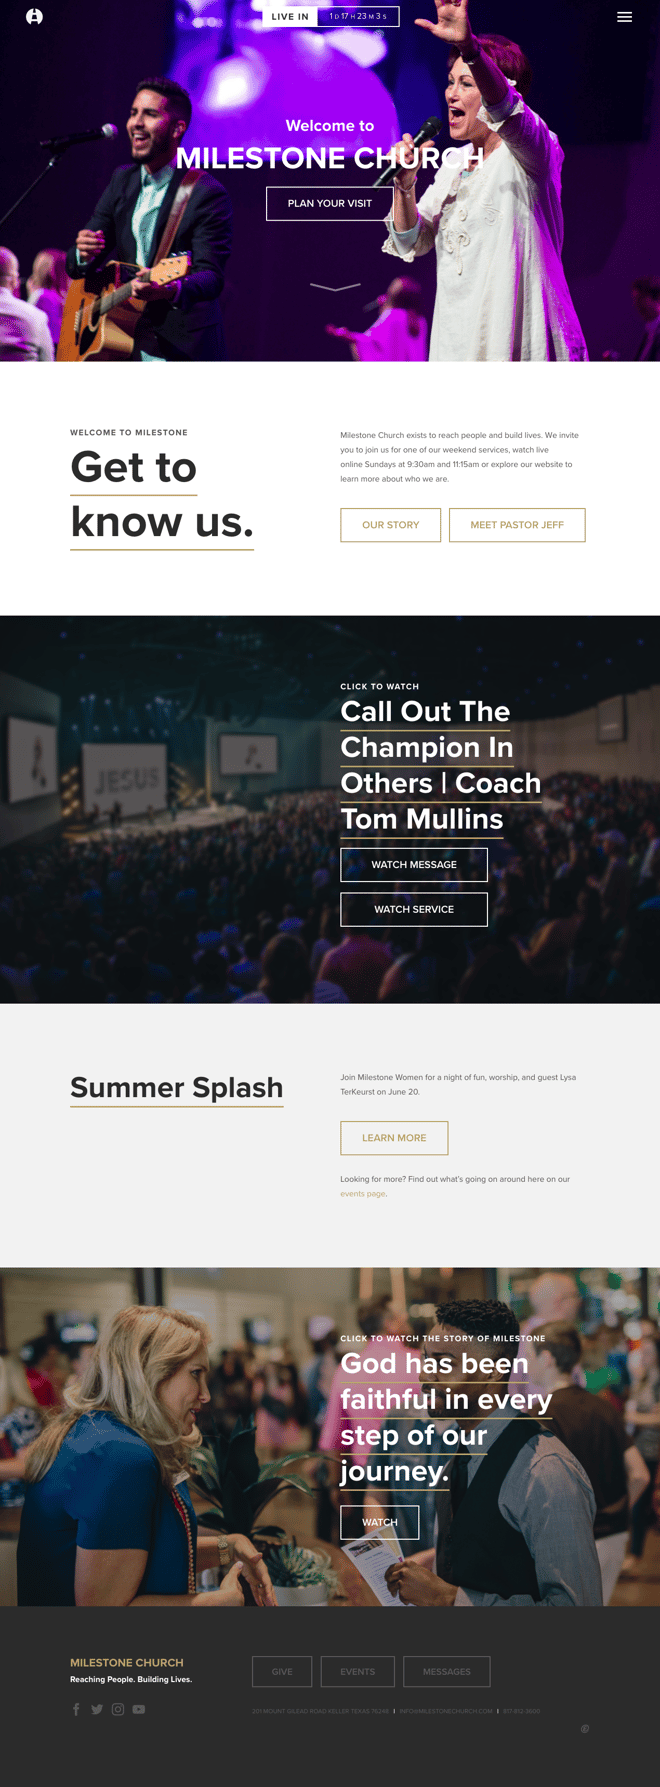 6-awesome-multi-site-church-websites-for-inspiration-milestone.png